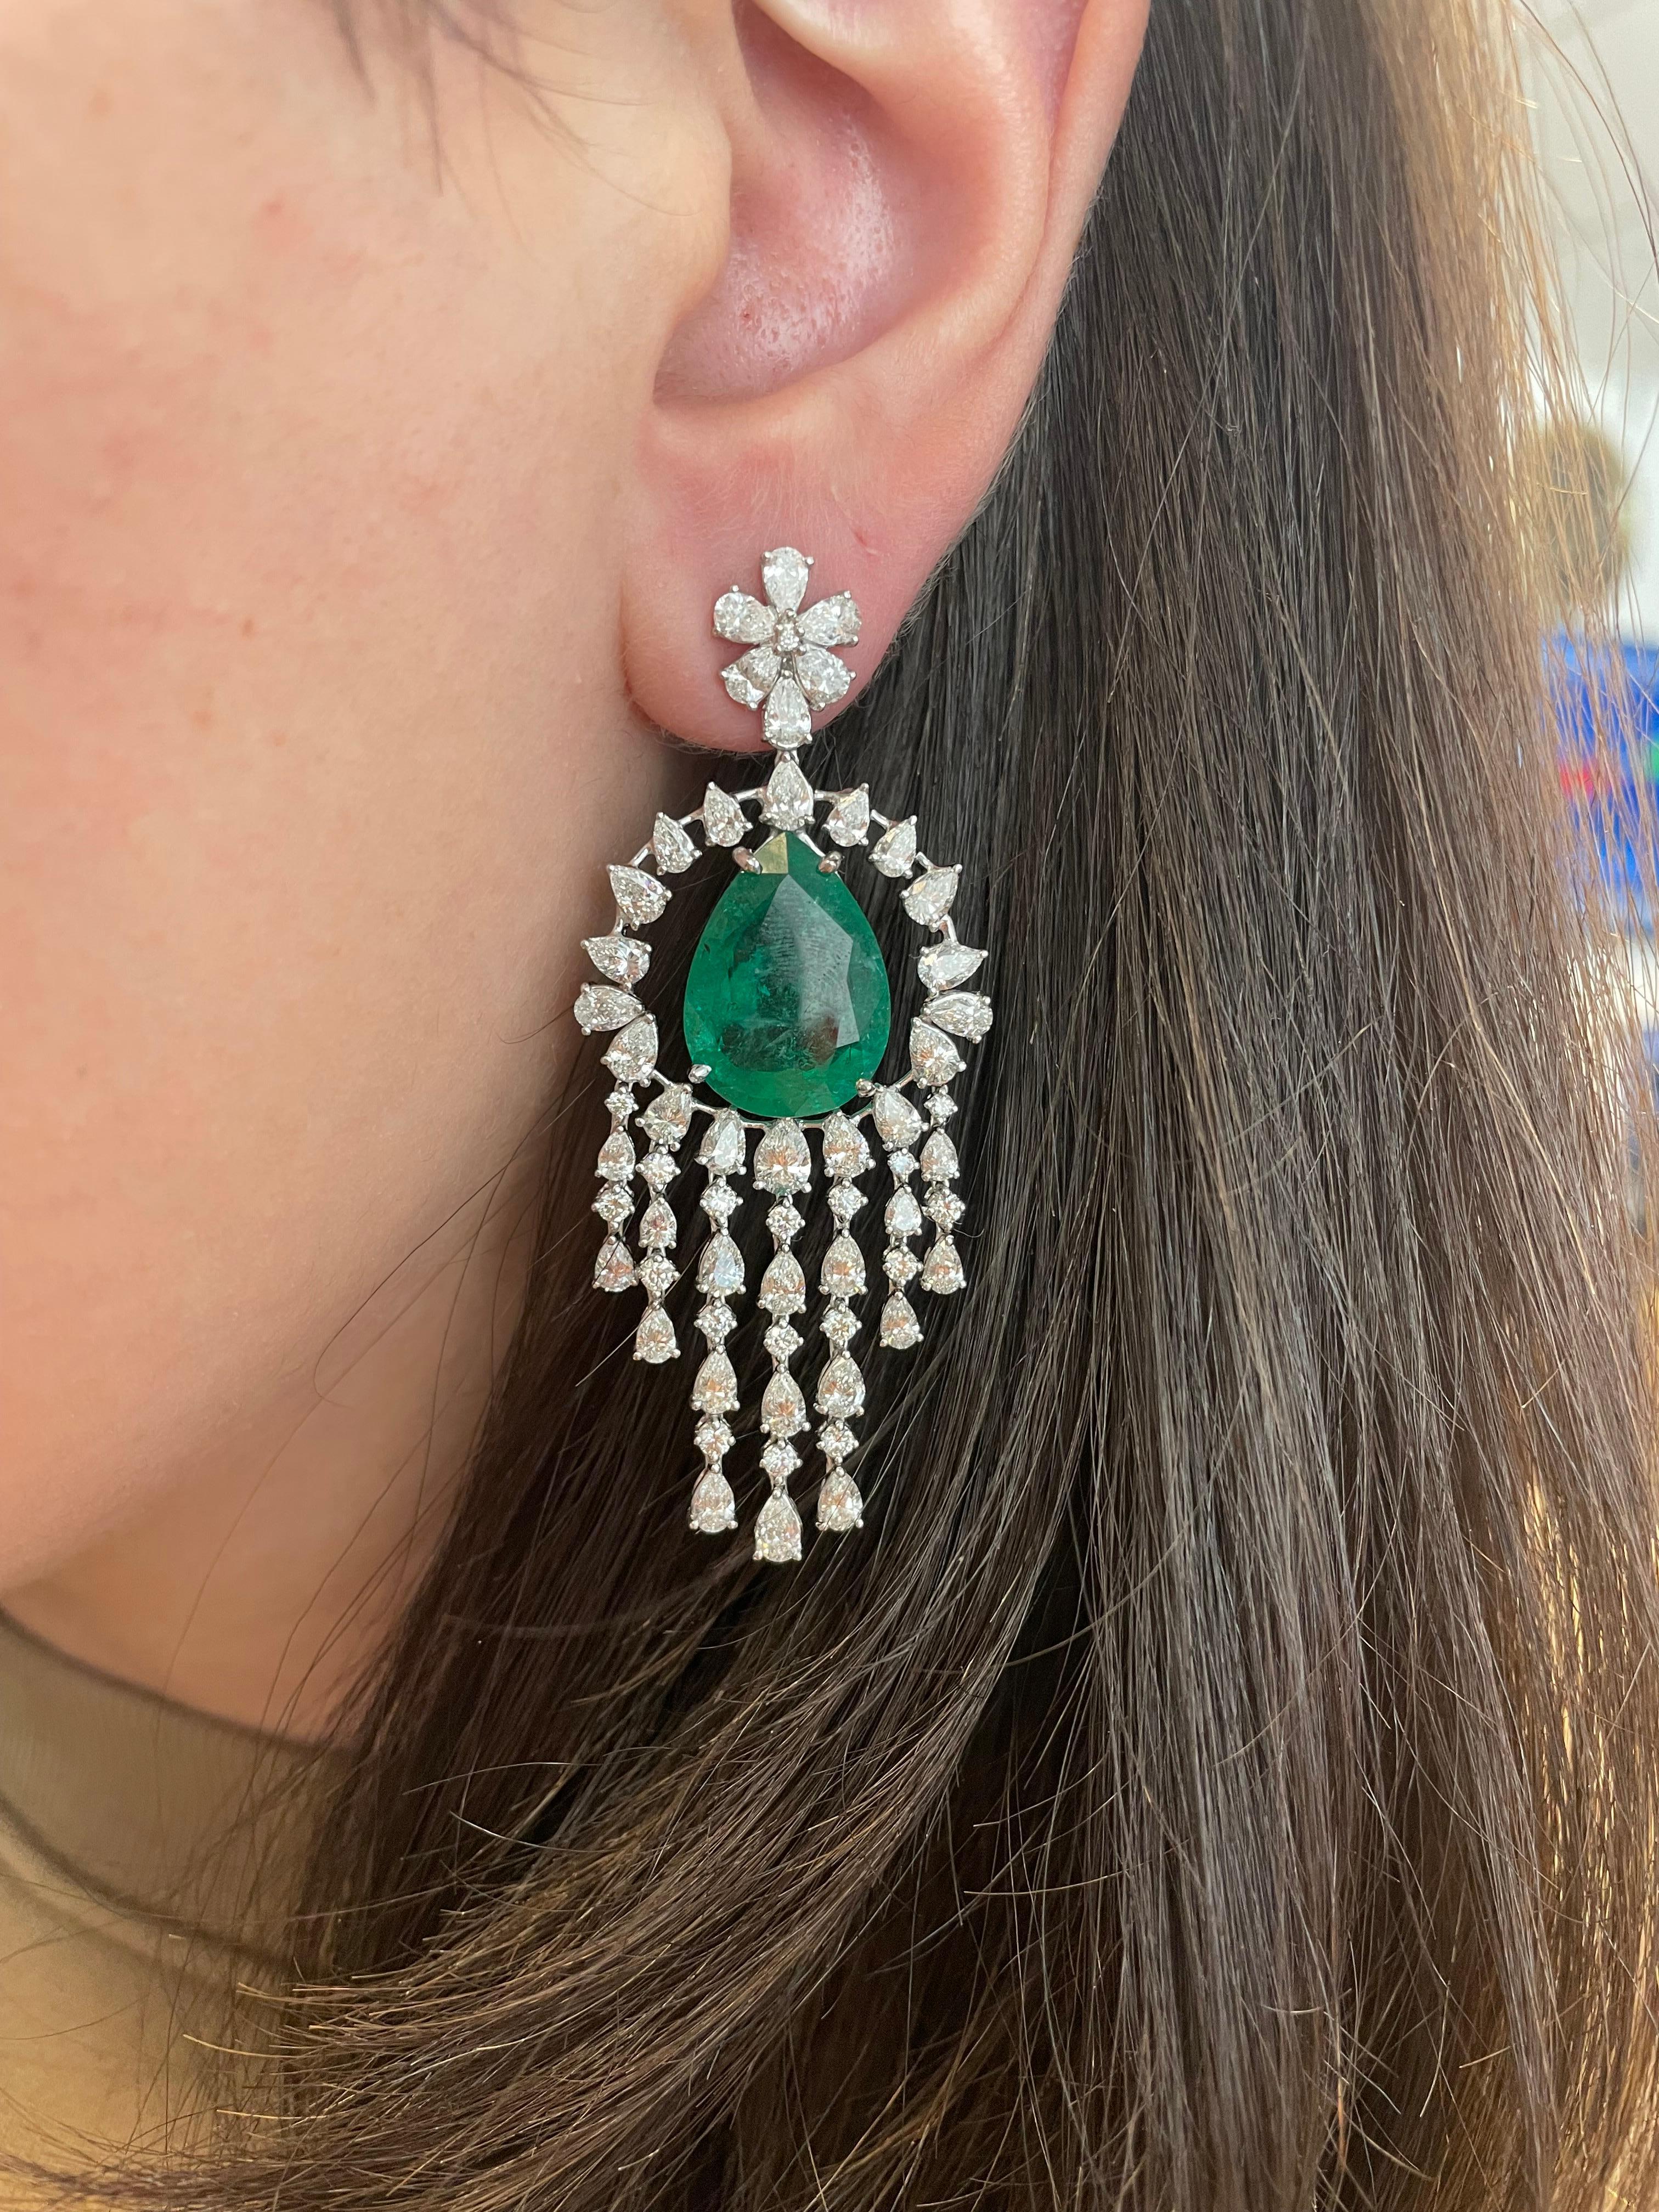 Stunning emerald and diamond chandelier earrings.. High jewelry by Alexander Beverly Hills.
2 pear emeralds, 21.05 carats, apx F2. Complimented by 124 pear and round cut diamonds, 11.87 carats. Approximately G/H color and VS2/SI1 clarity. 18-karat